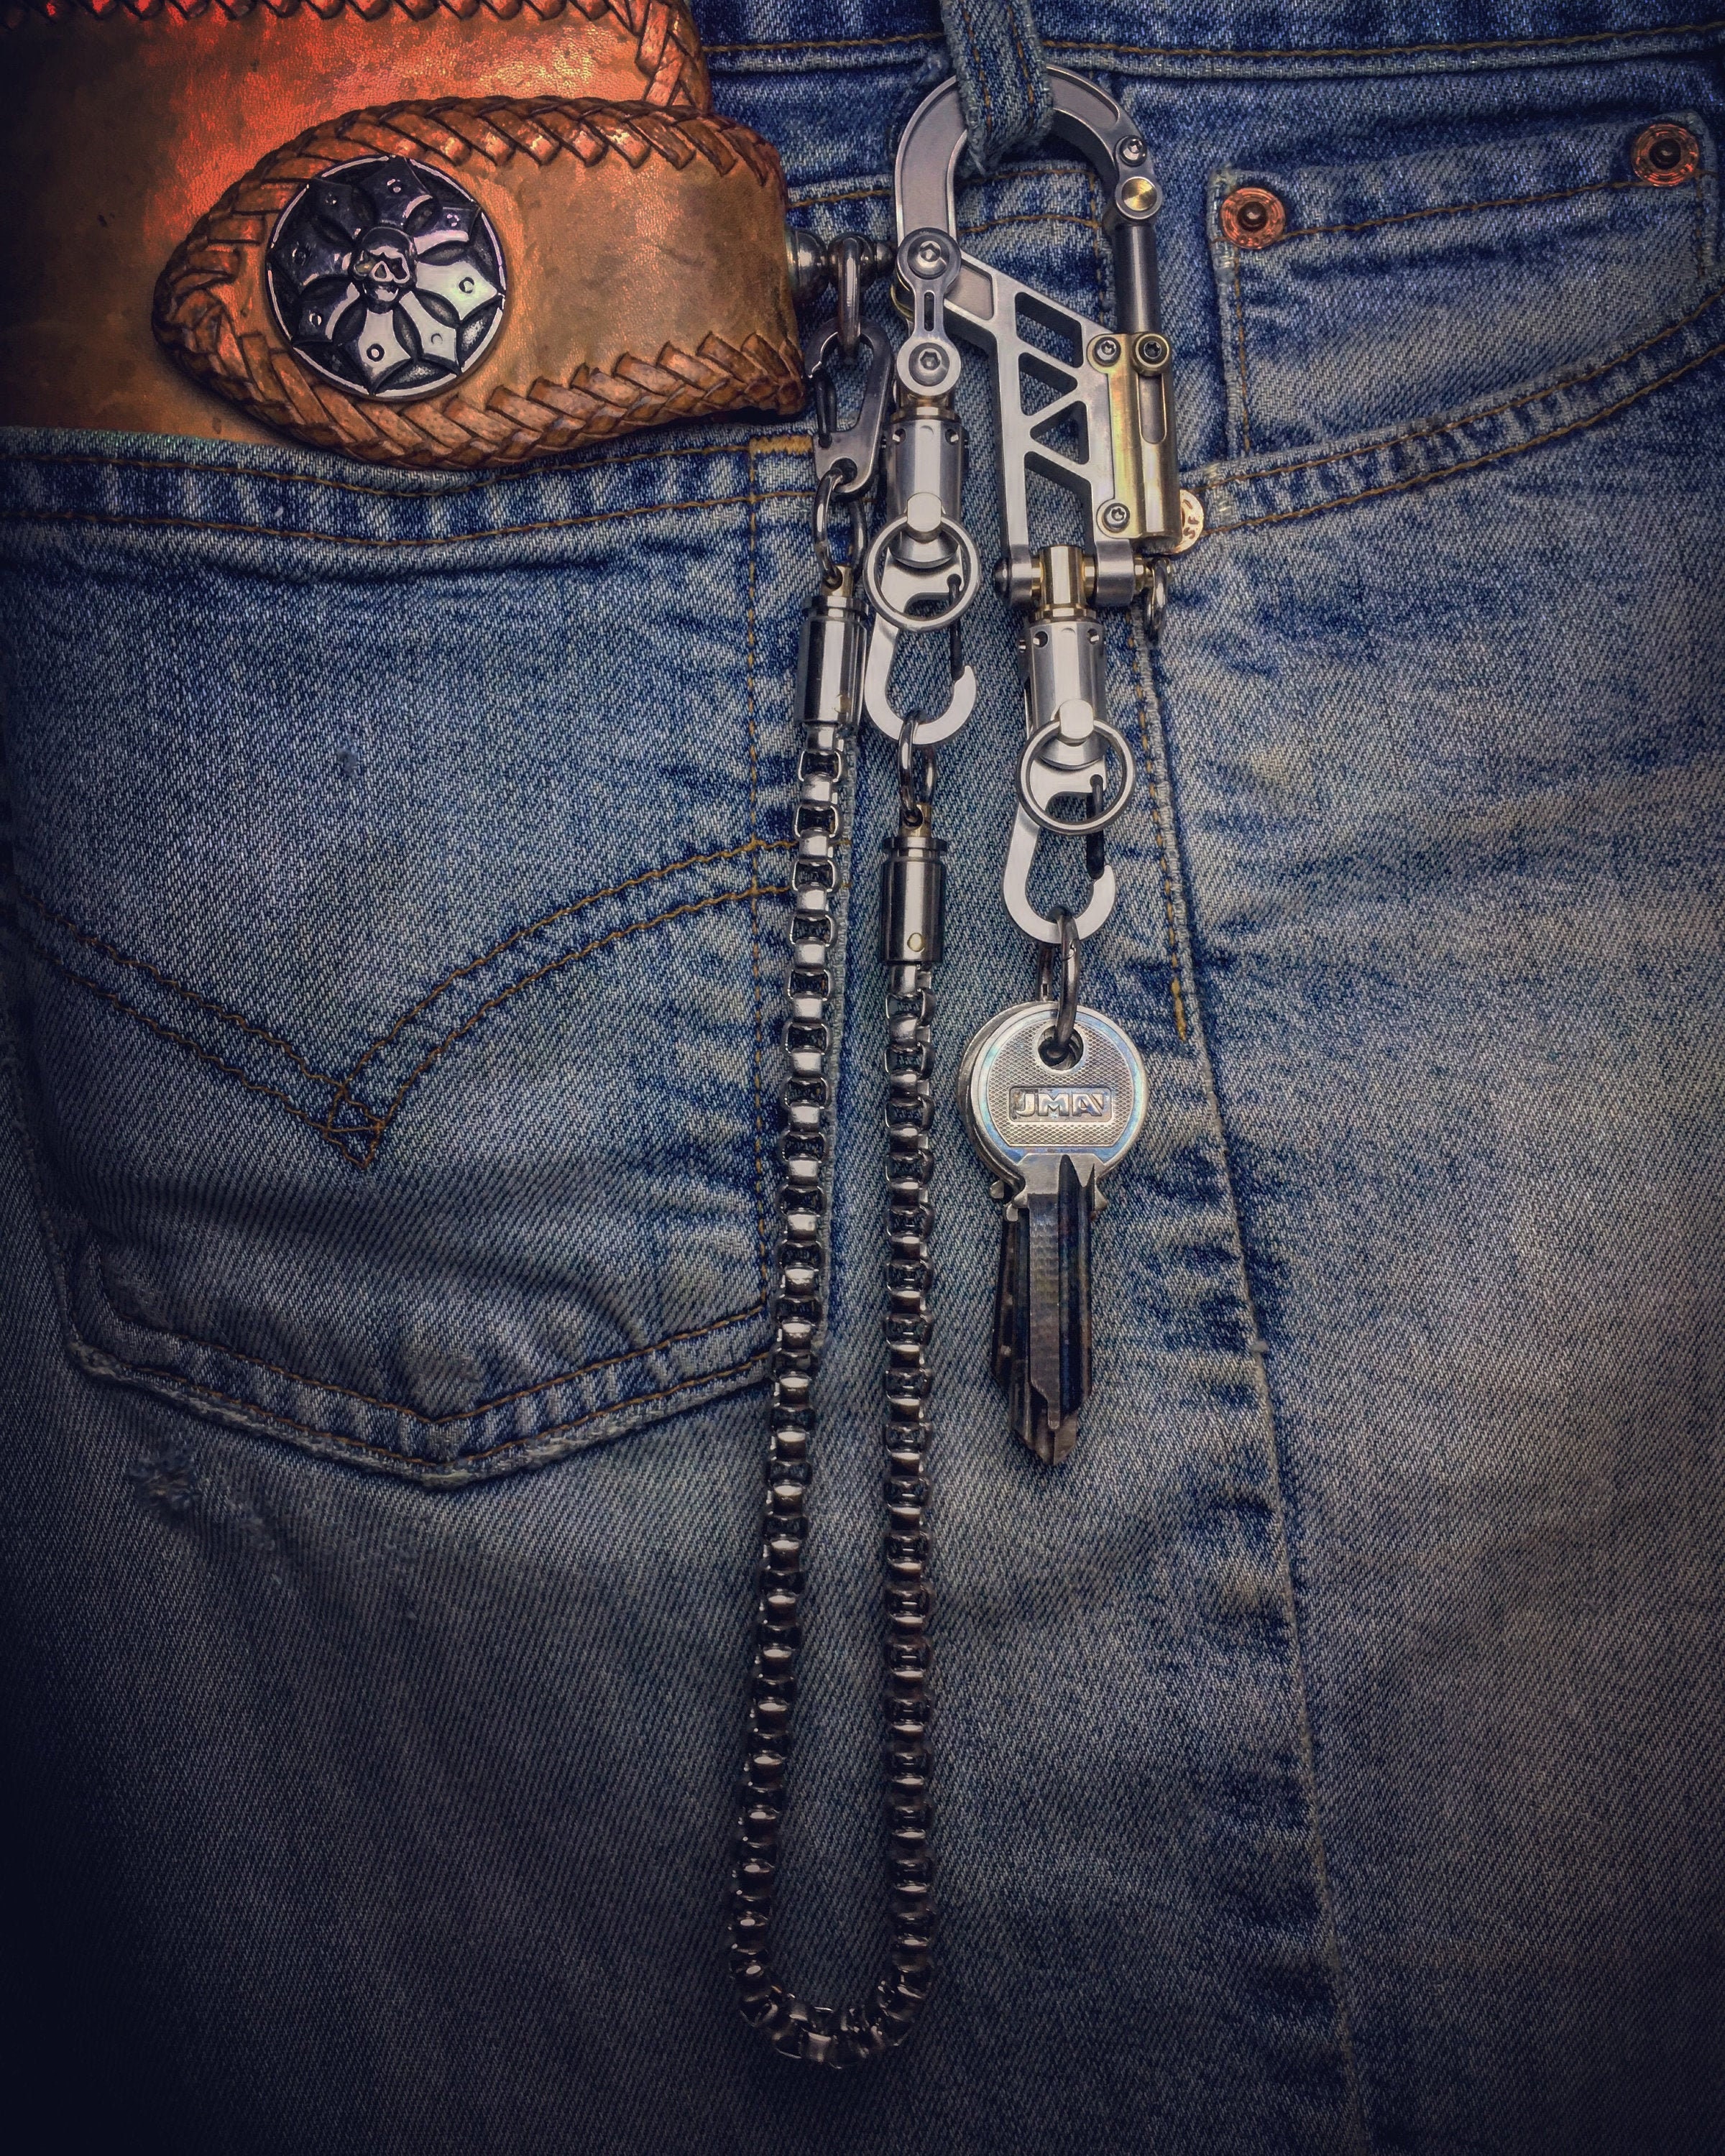 The Patriarch / TOP Bolt Carabiner Wallet & Key Chain